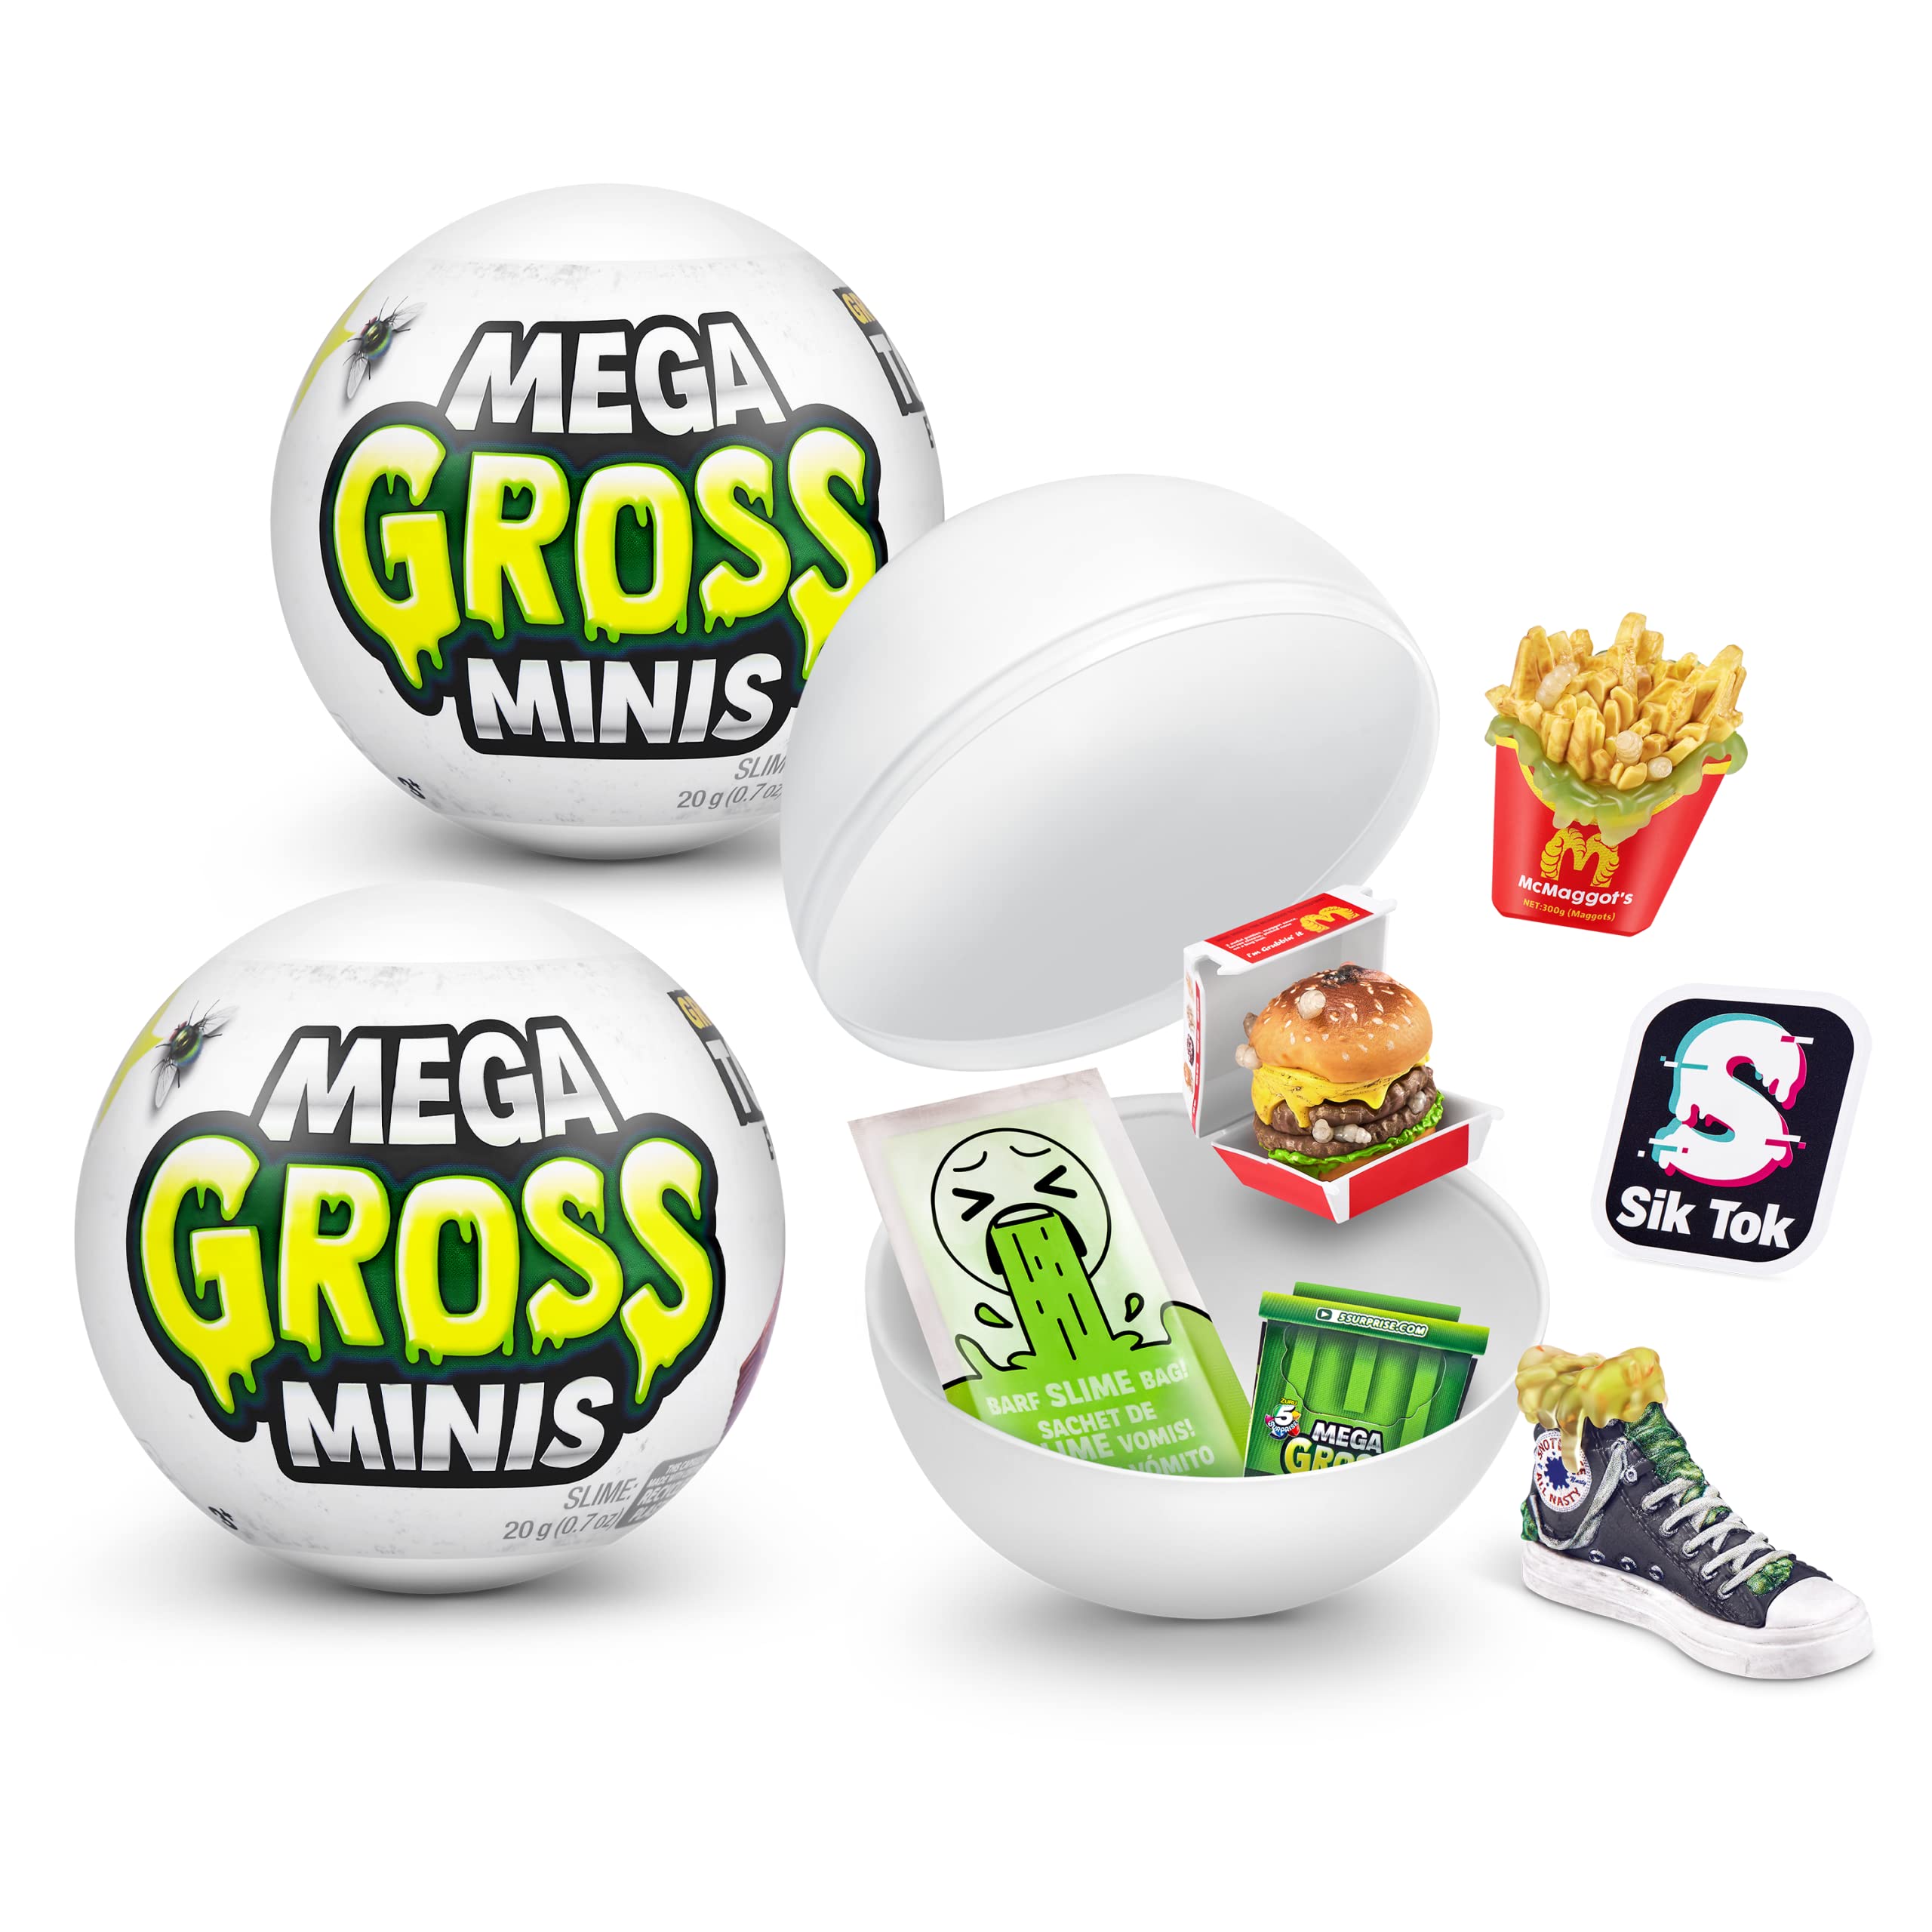 5 Surprise Mega Gross Minis by ZURU Boys Mystery Collectible Minis Brands Parody, Toys for Boys and Girls 3+, Halloween Toy